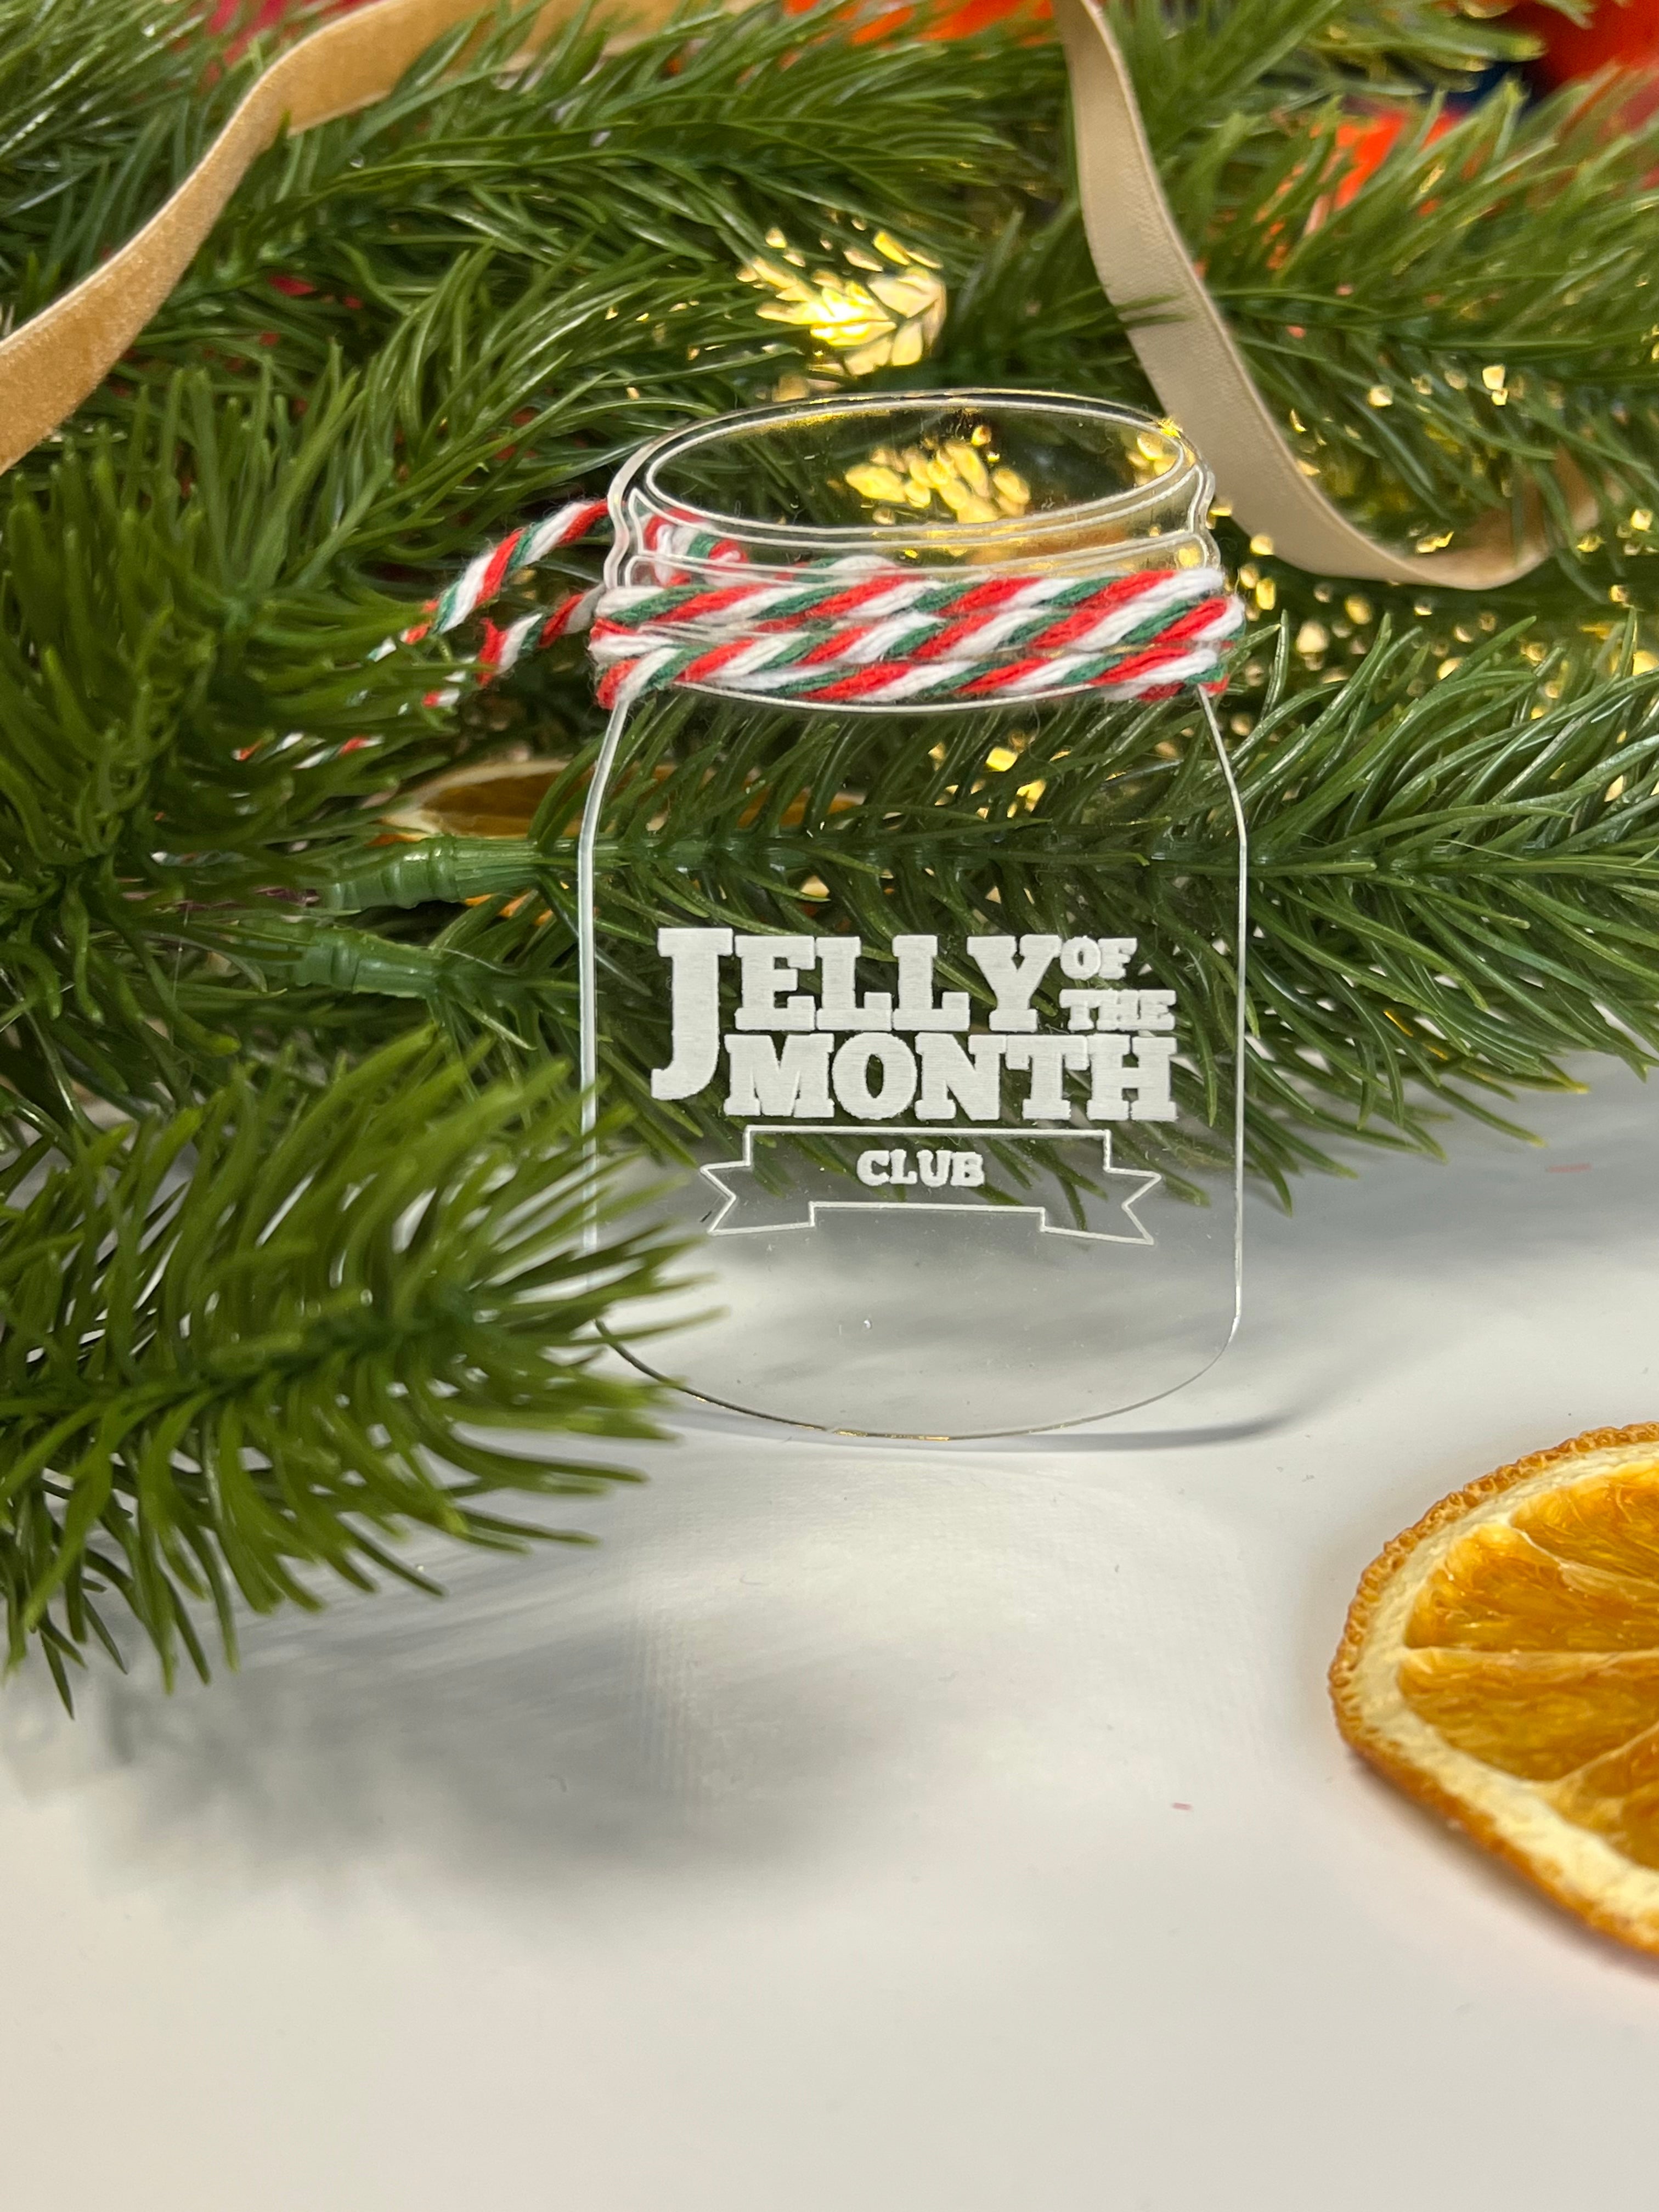 Acrylic Jelly of the Month Club Christmas Ornament